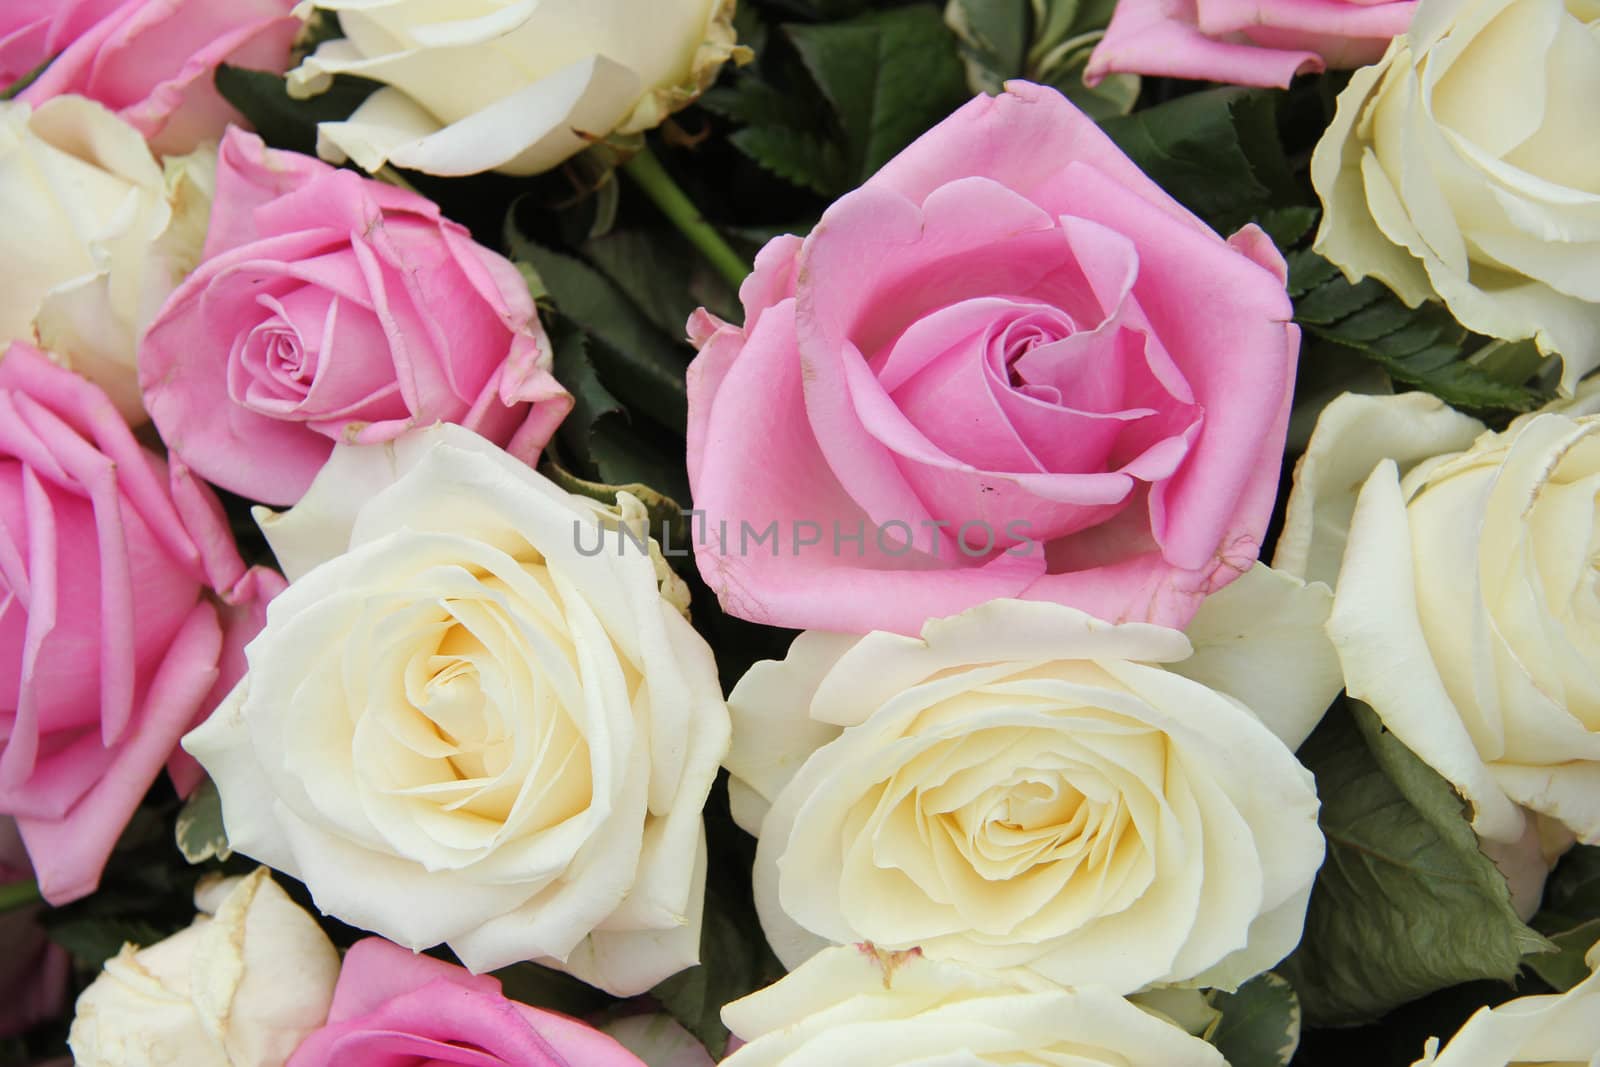 big white and pink roses in a bridal bouquet